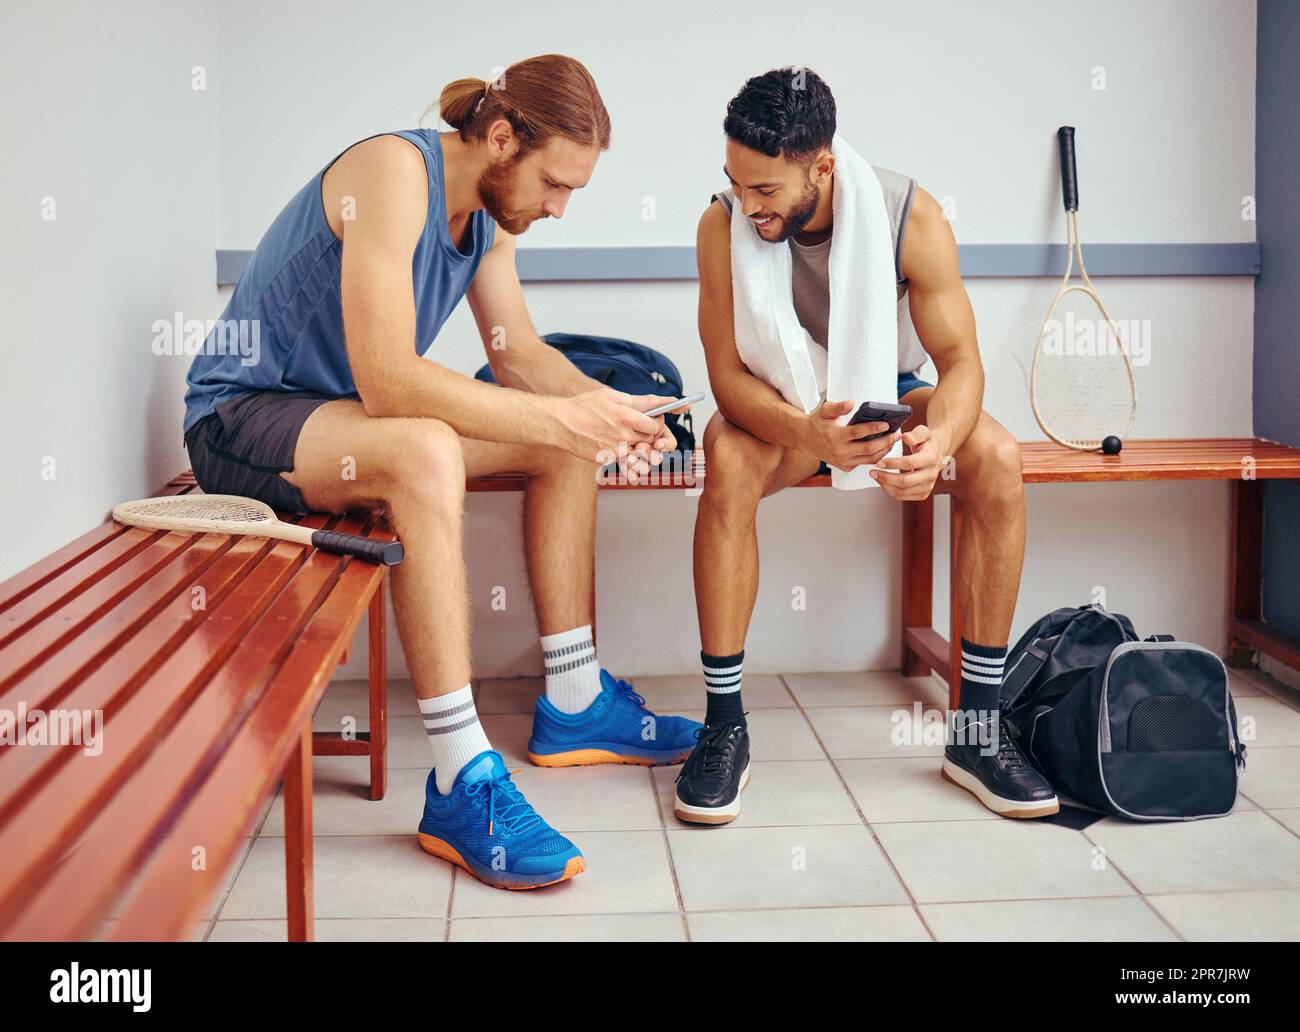 Two players bonding in their gym locker room. Two professional athletes using their cellphones together. Professional squash players talking and using their smartphones to text in the locker room Stock Photo